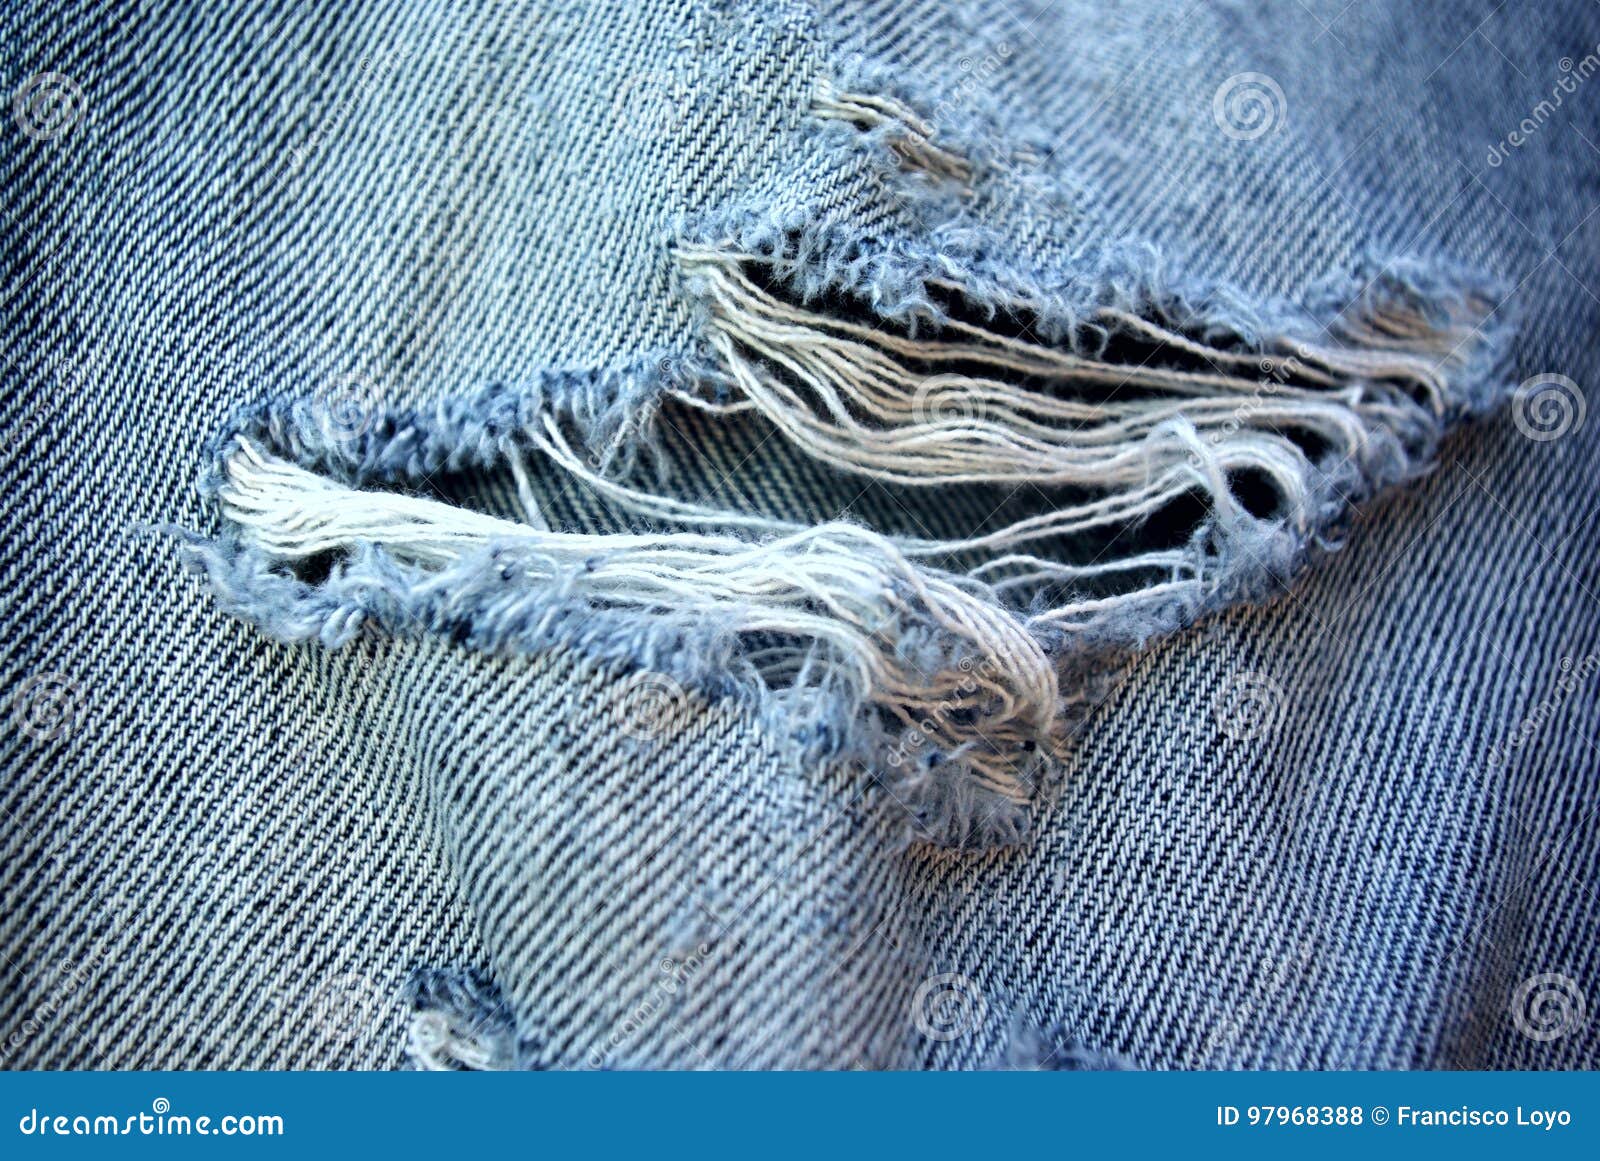 Texture worn out jean 001 stock photo. Image of detail - 97968388